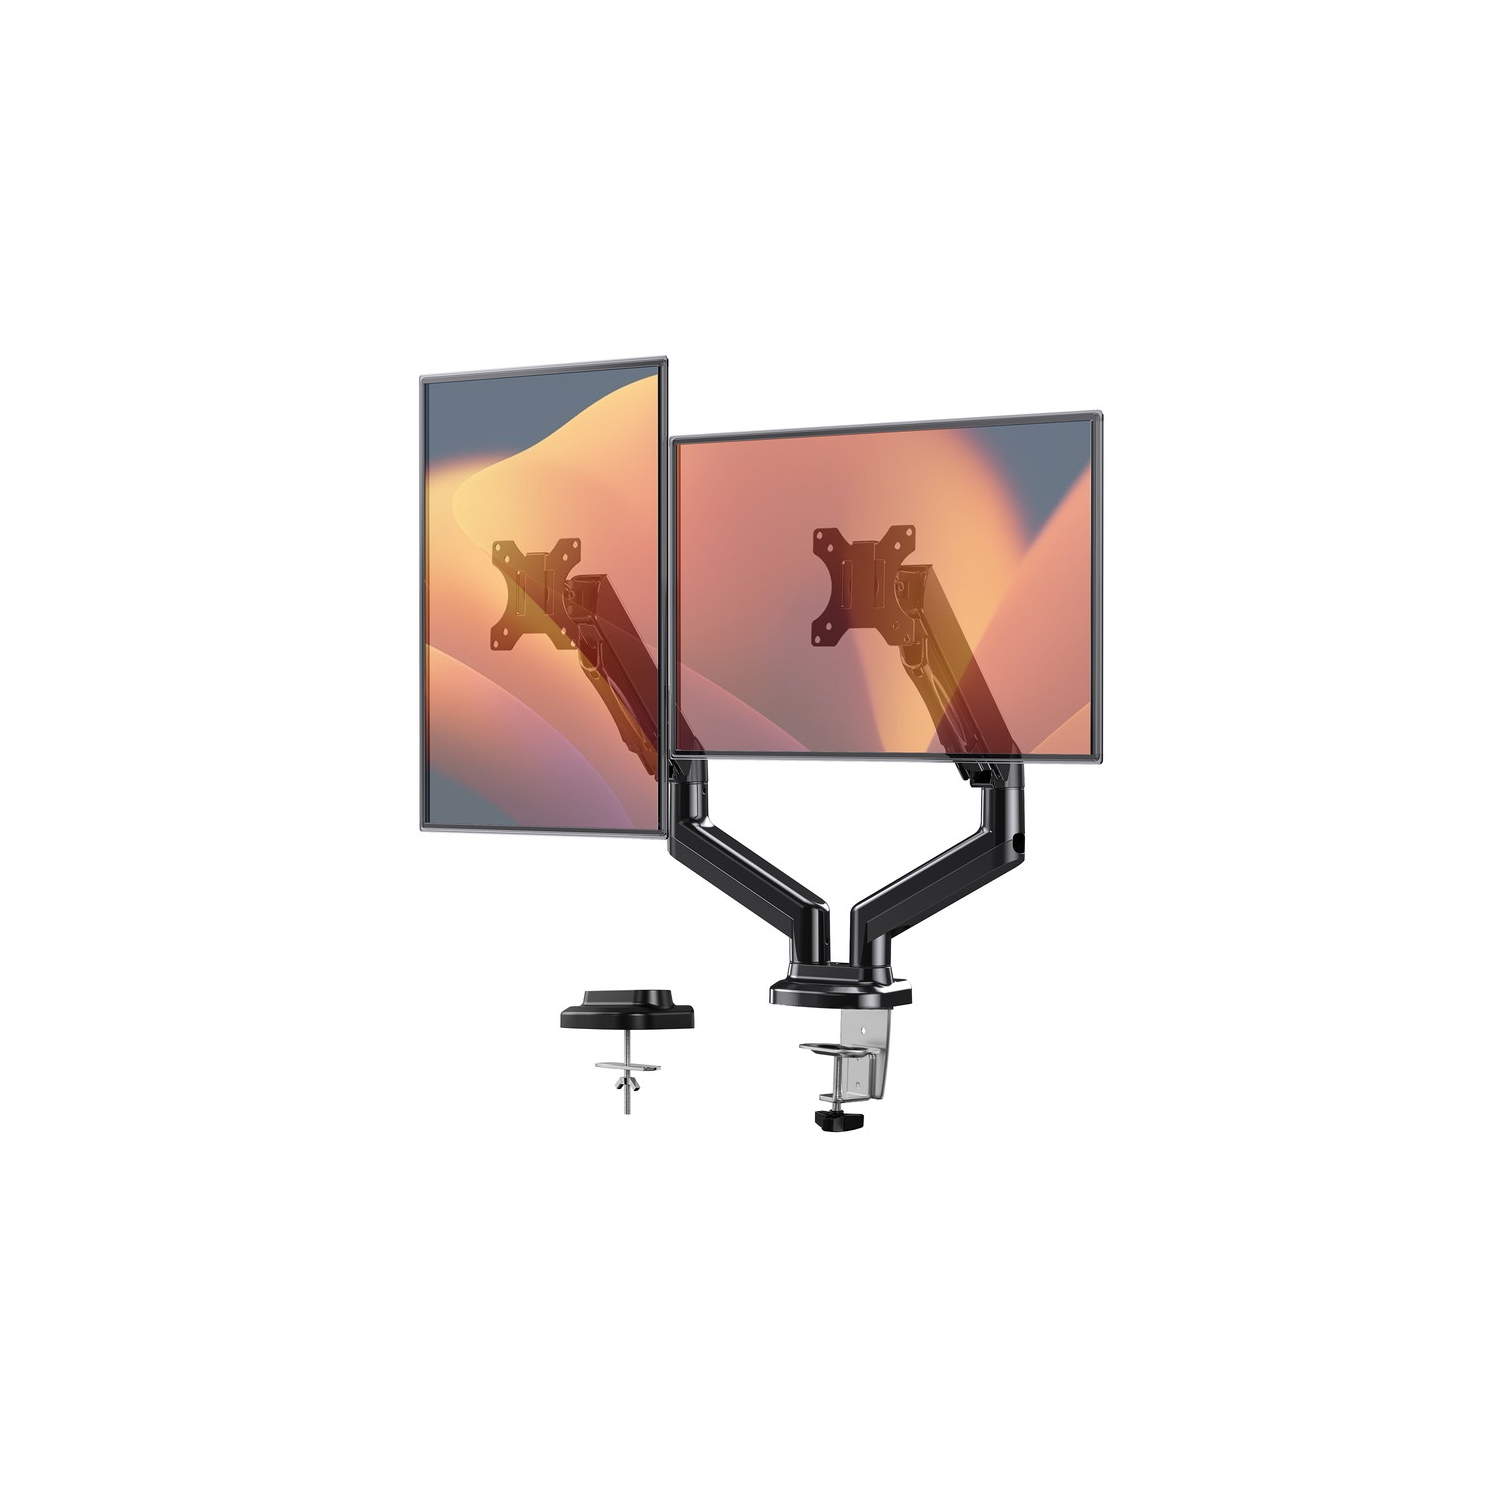 HUANUO Full Motion Monitor Mount Fits 2, 13"-27" Monitors with Gas Spring Arms For Effortless Adjustments.